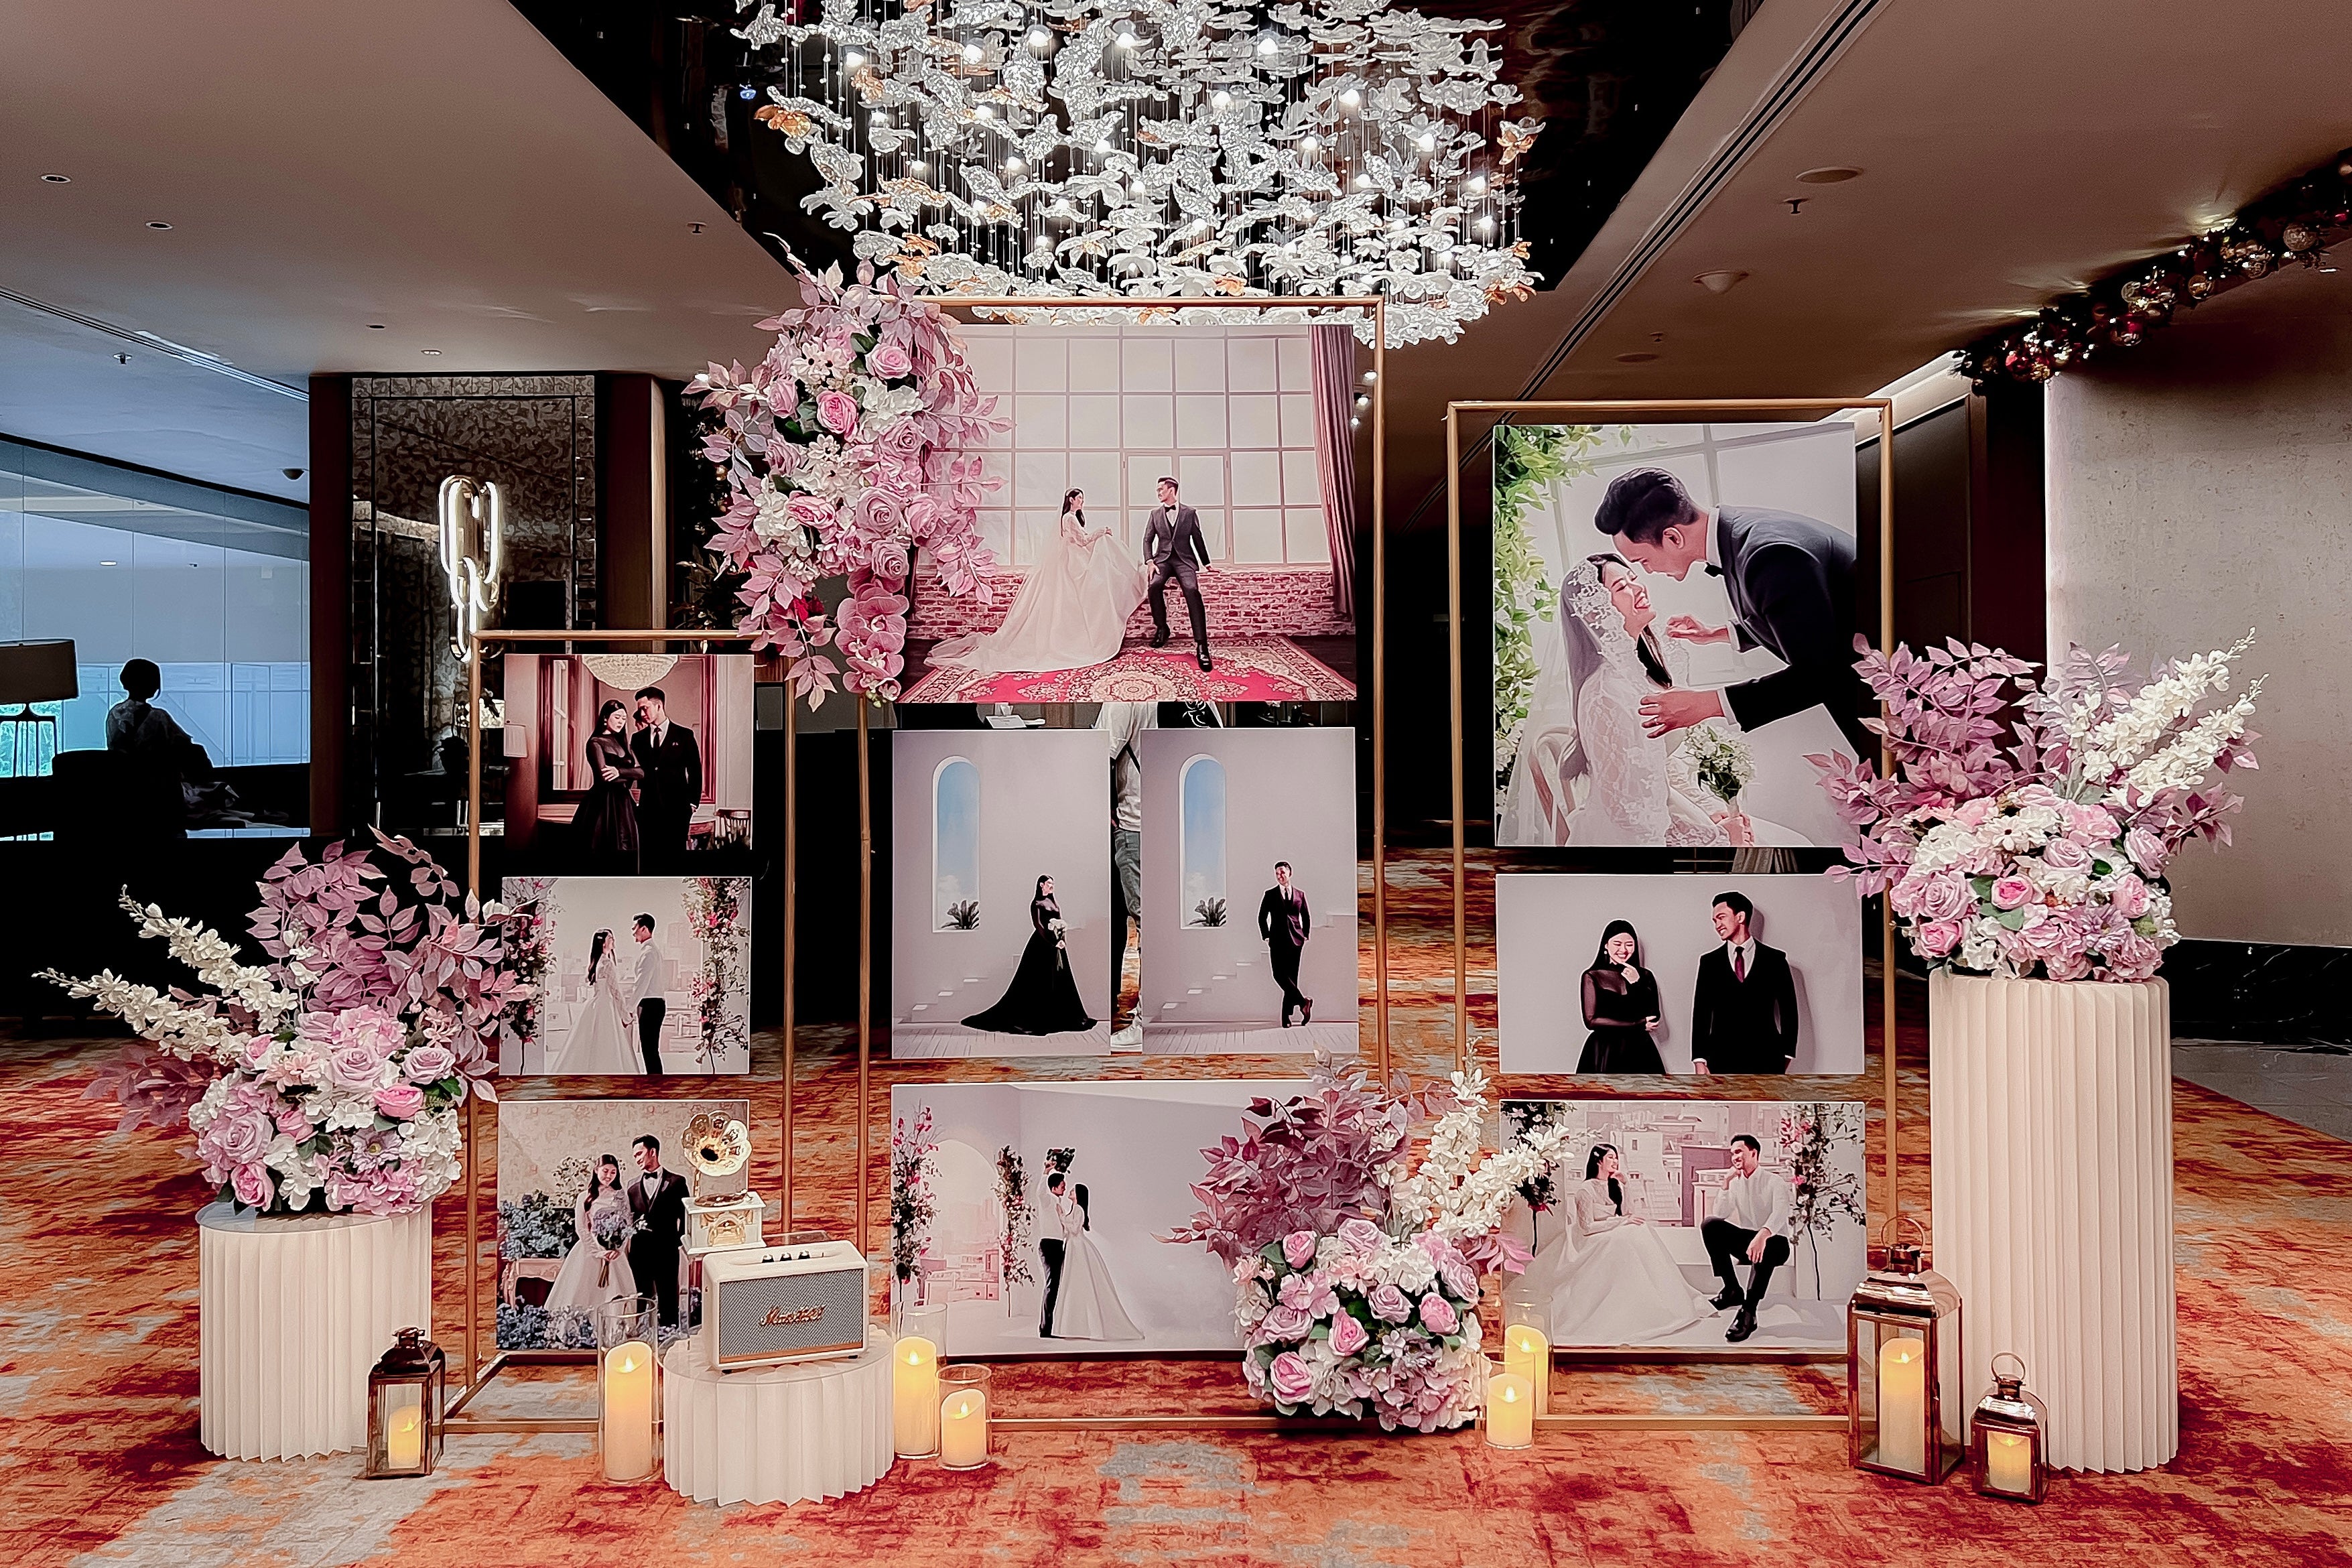 Wedding Reception Decor in Singapore - Multi-stands Photo Gallery with Purple/Lilac White Florals (Venue: Orchard Hotel Singapore)